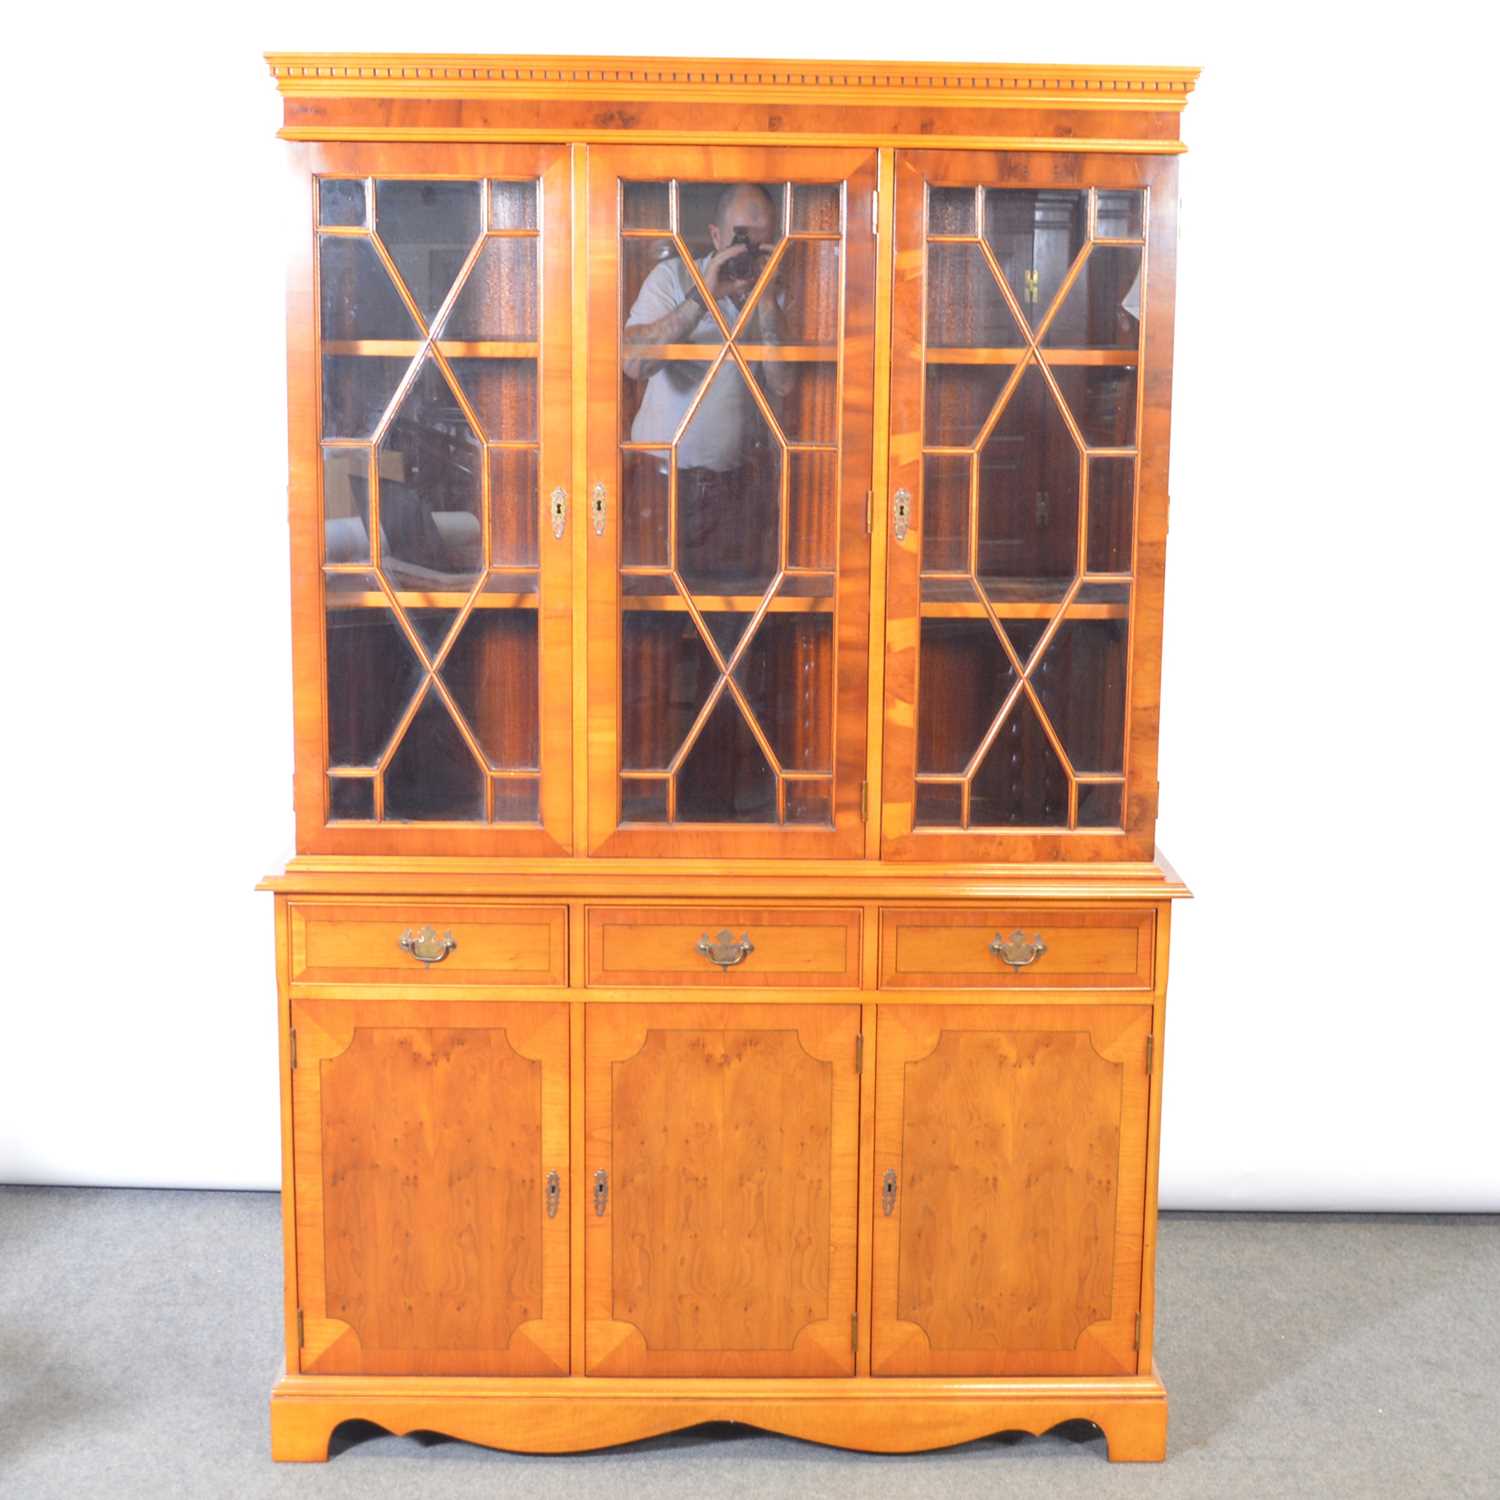 Lot 347 - Reproduction yew wood bookcase